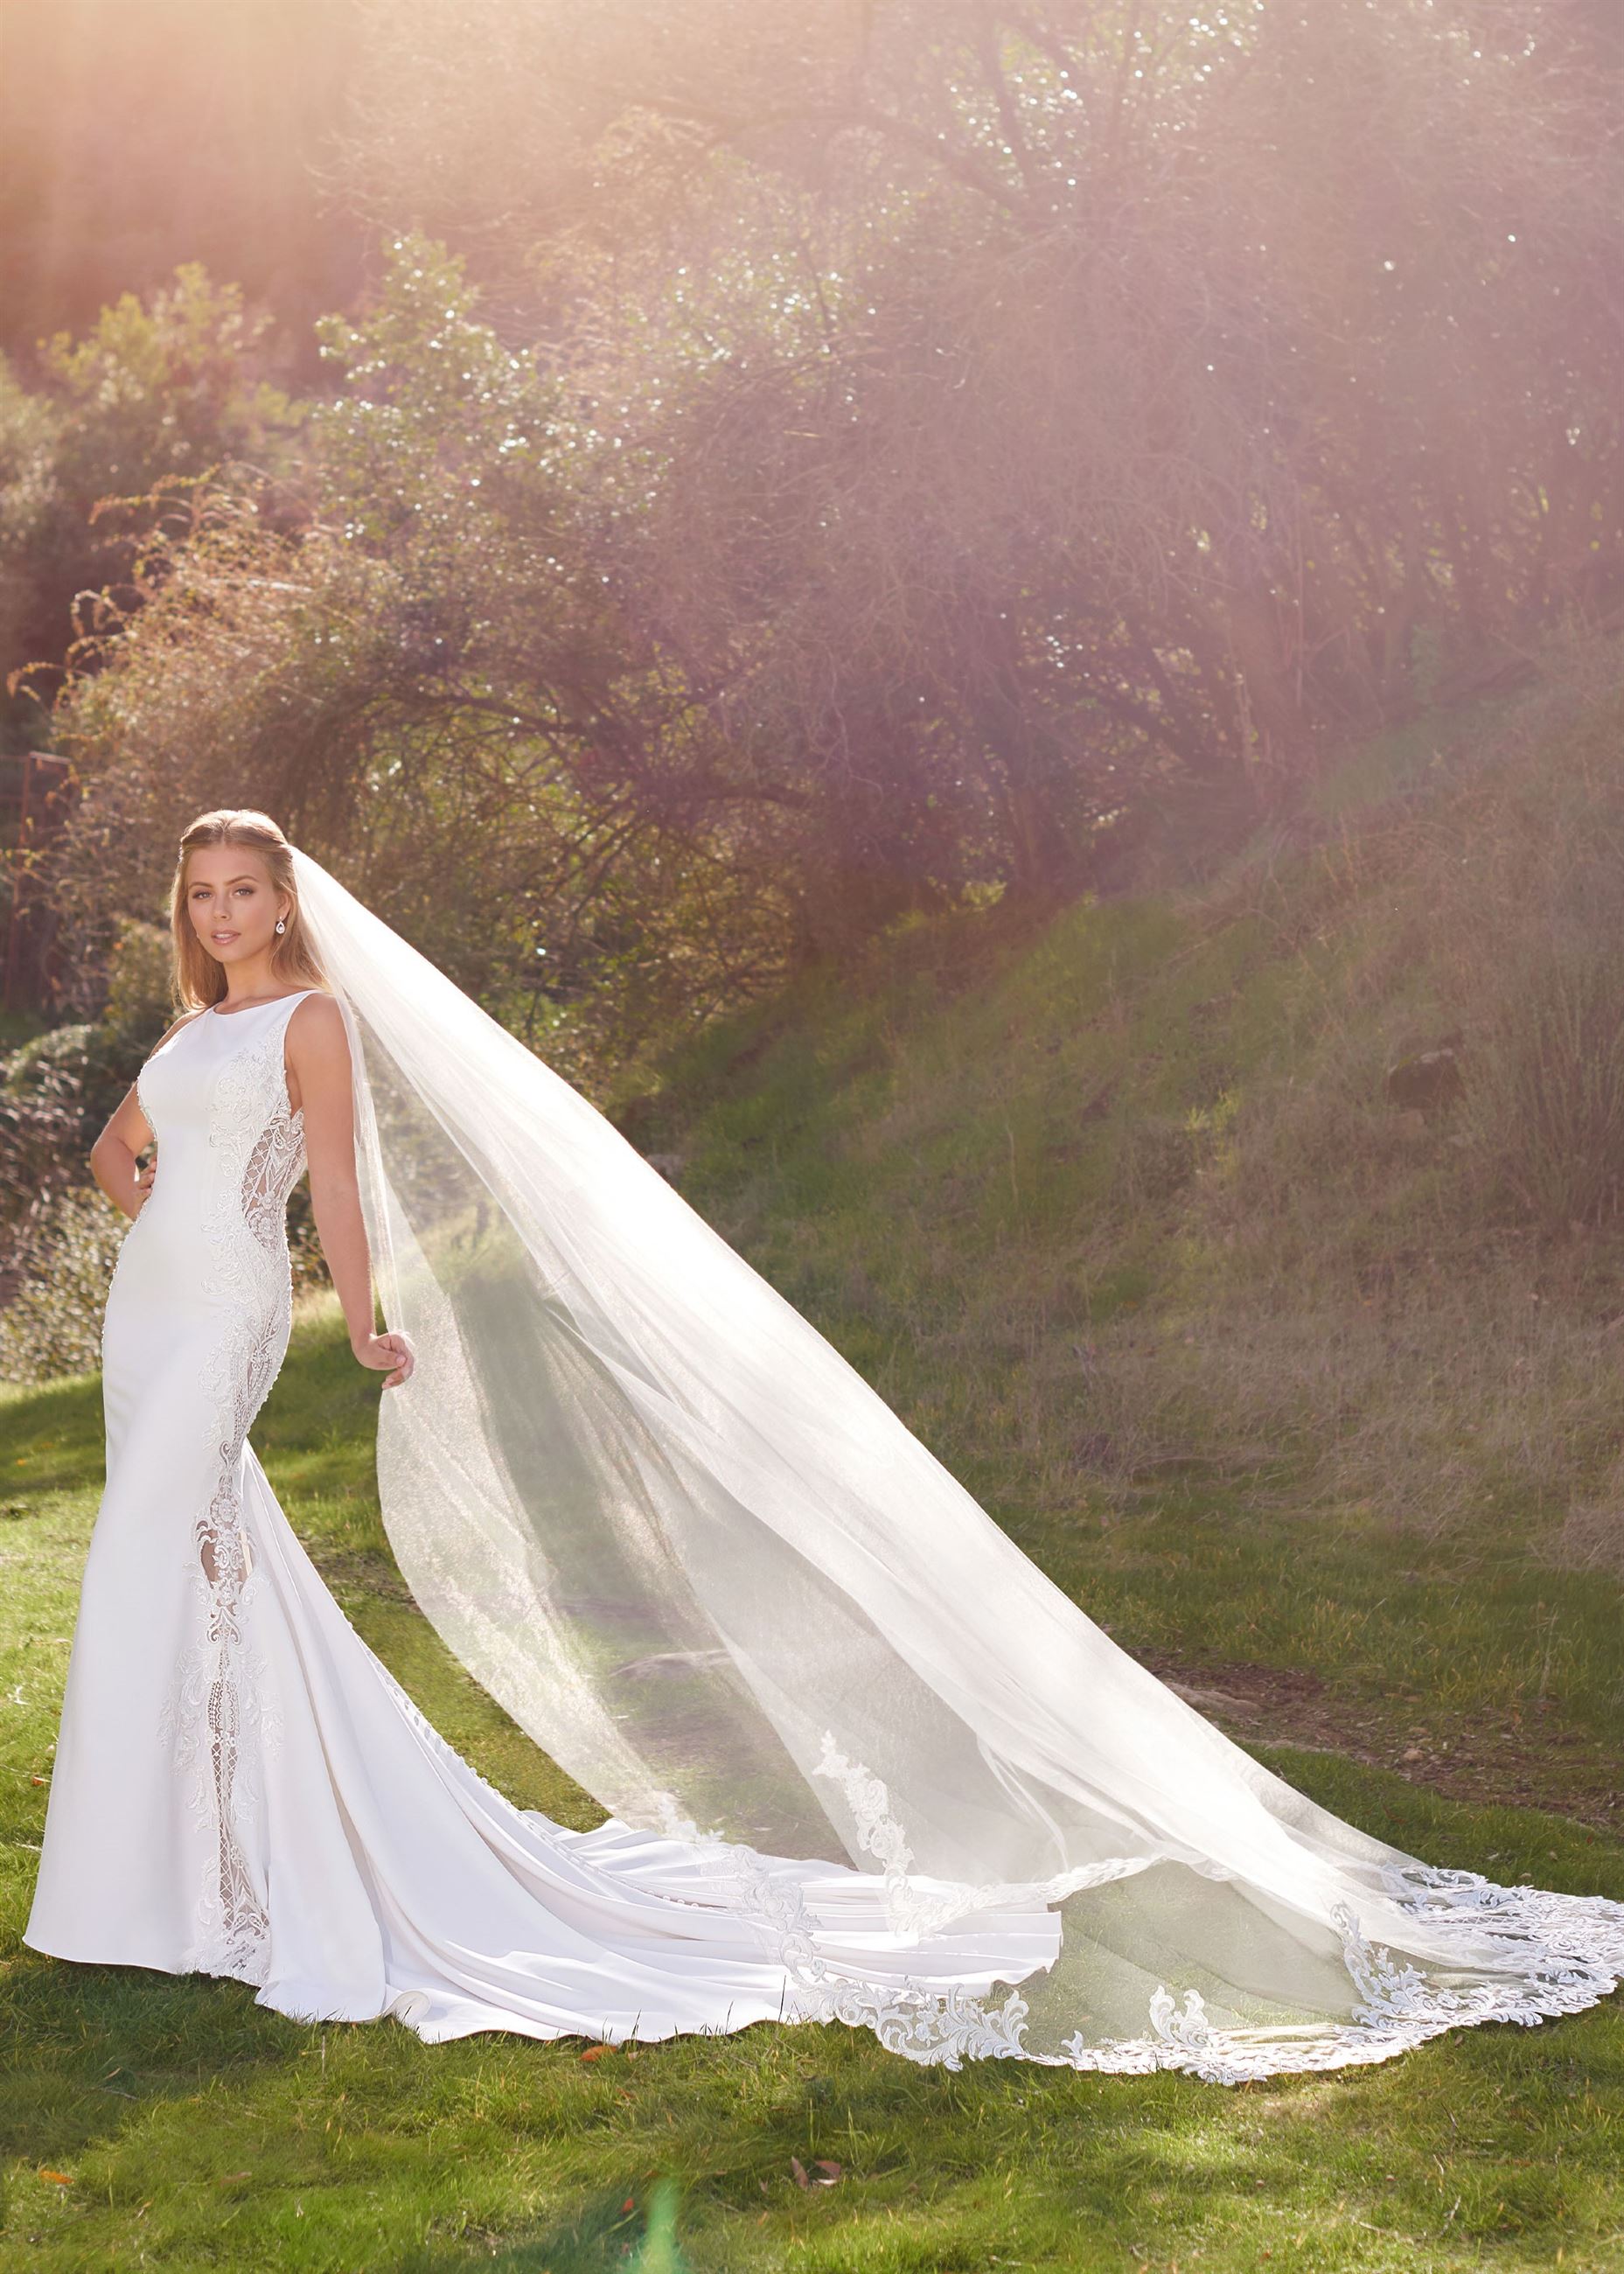 Bride wearing simple fit and flare wedding dress by Martin Thornburg